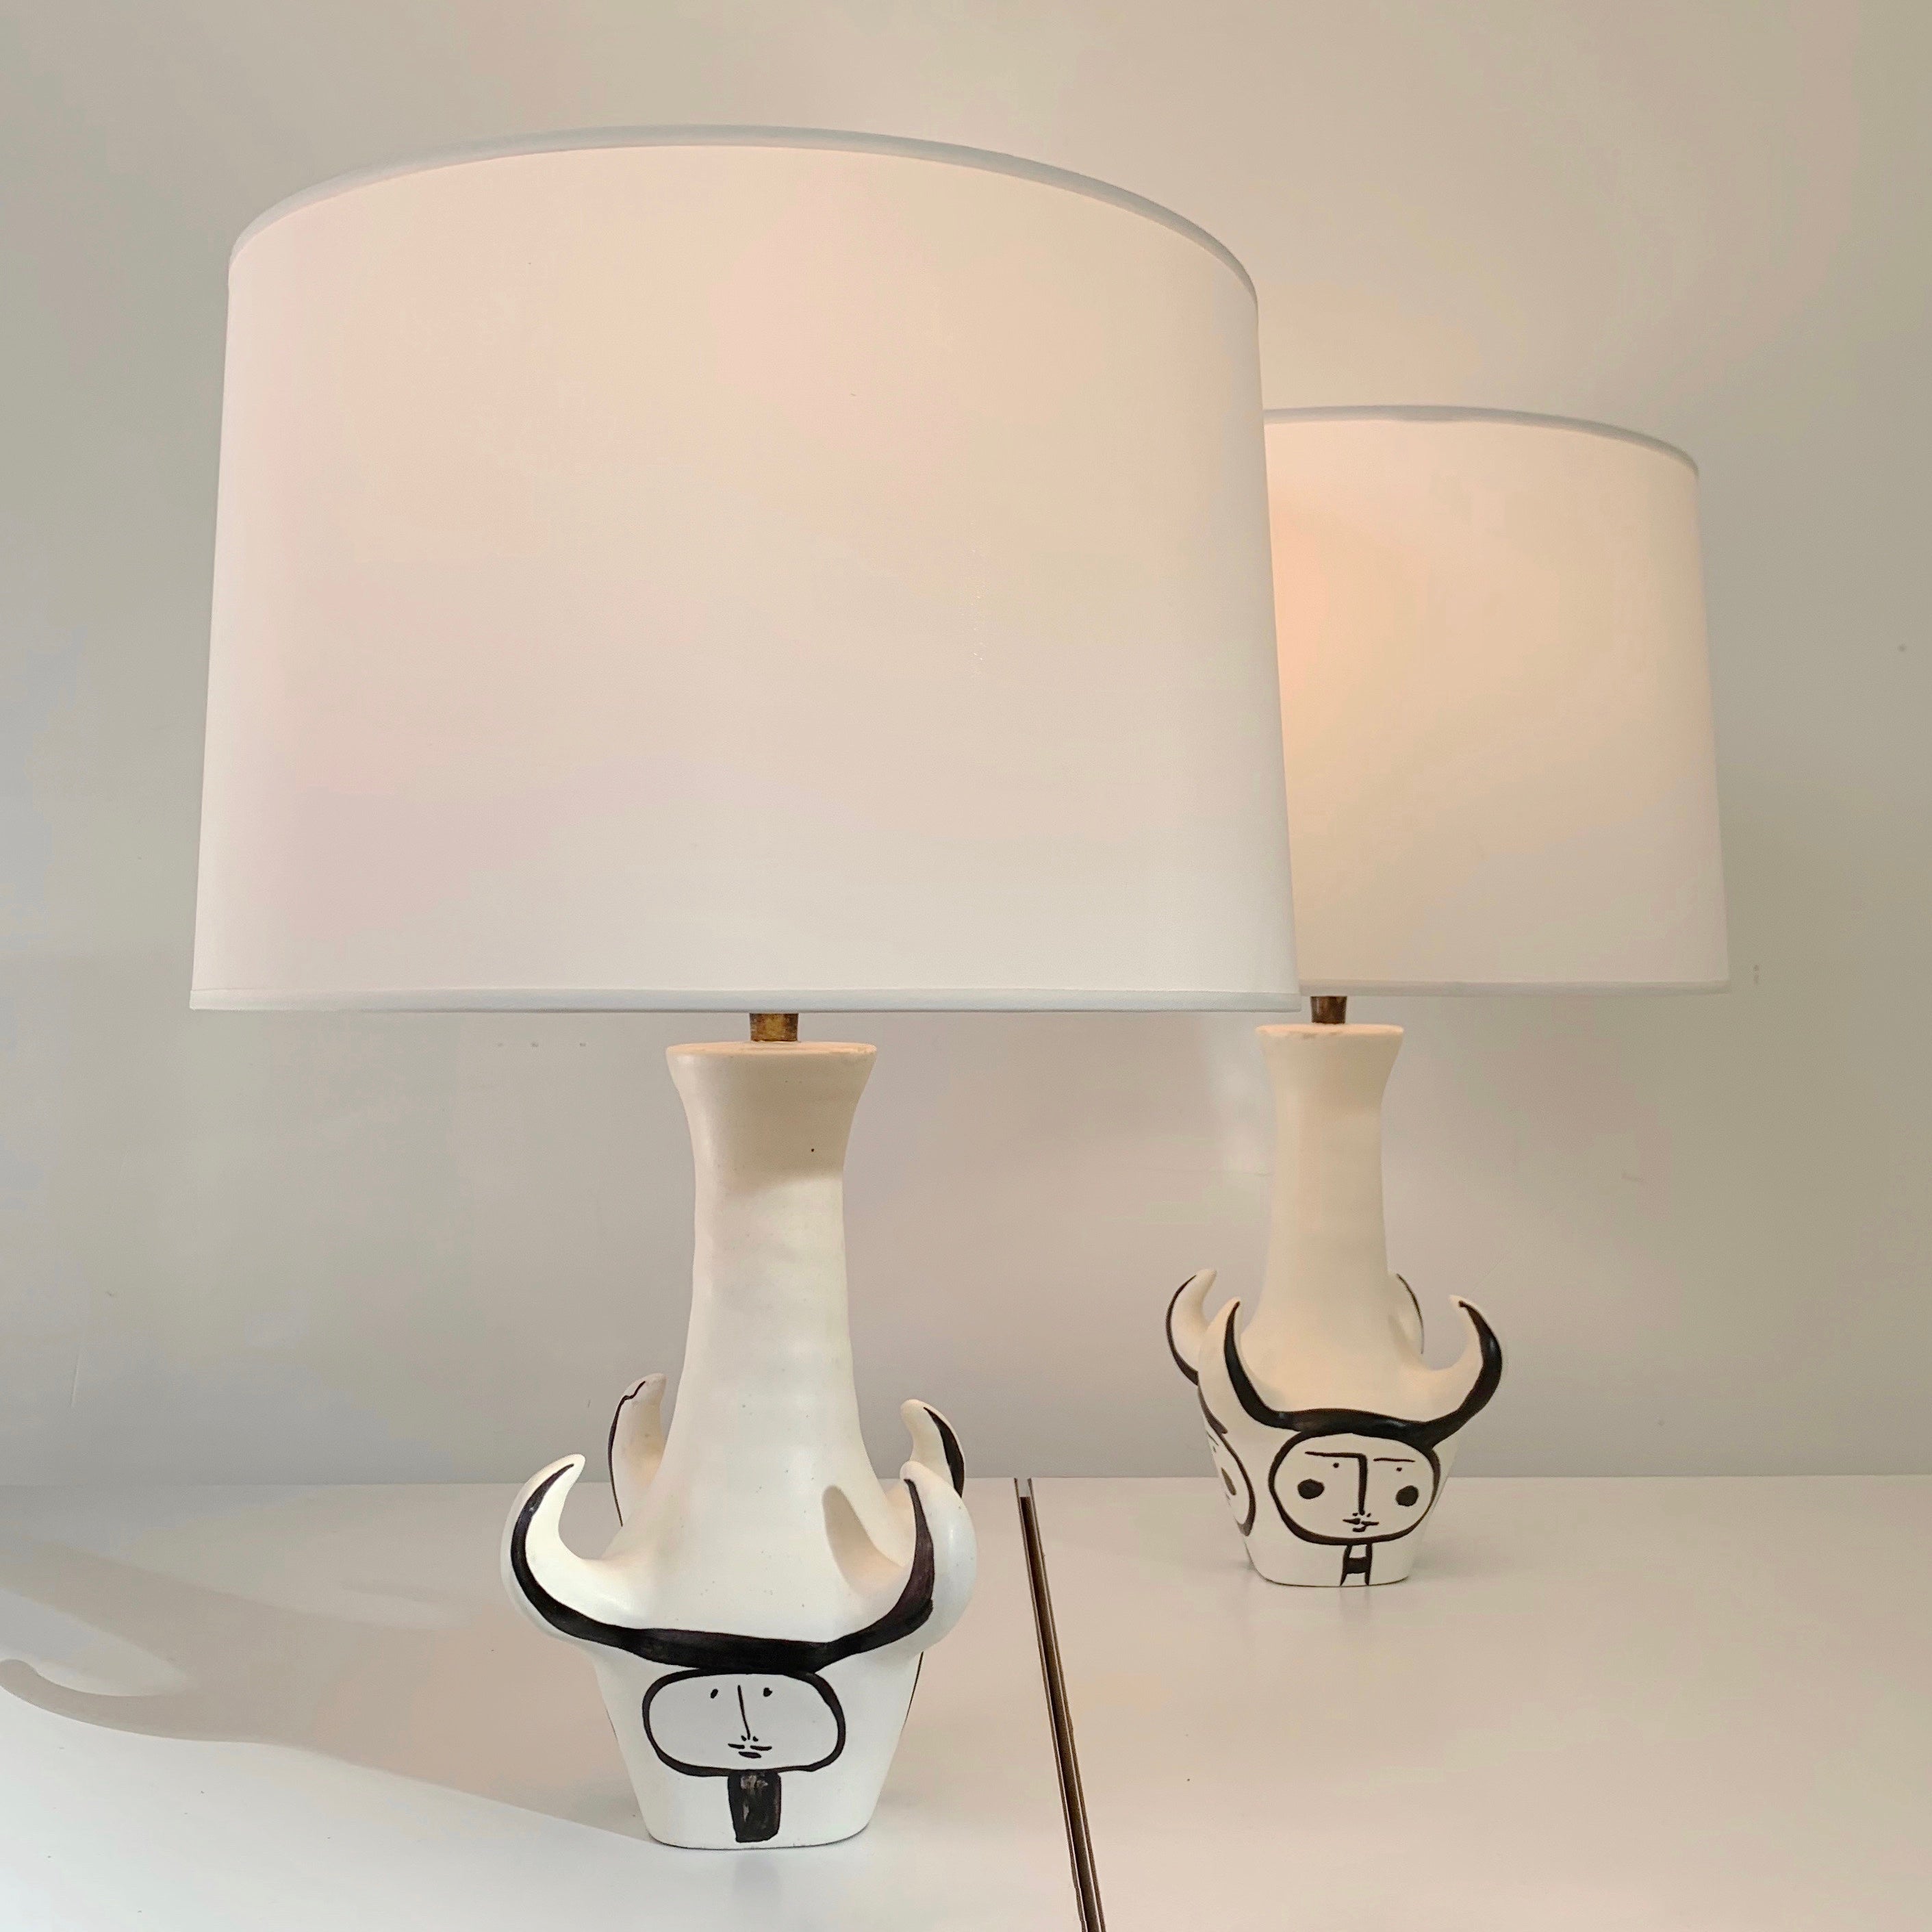 French  Roger Capron Pair Of 4 Horns Signed Ceramic Table Lamps , circa 1955, France. For Sale